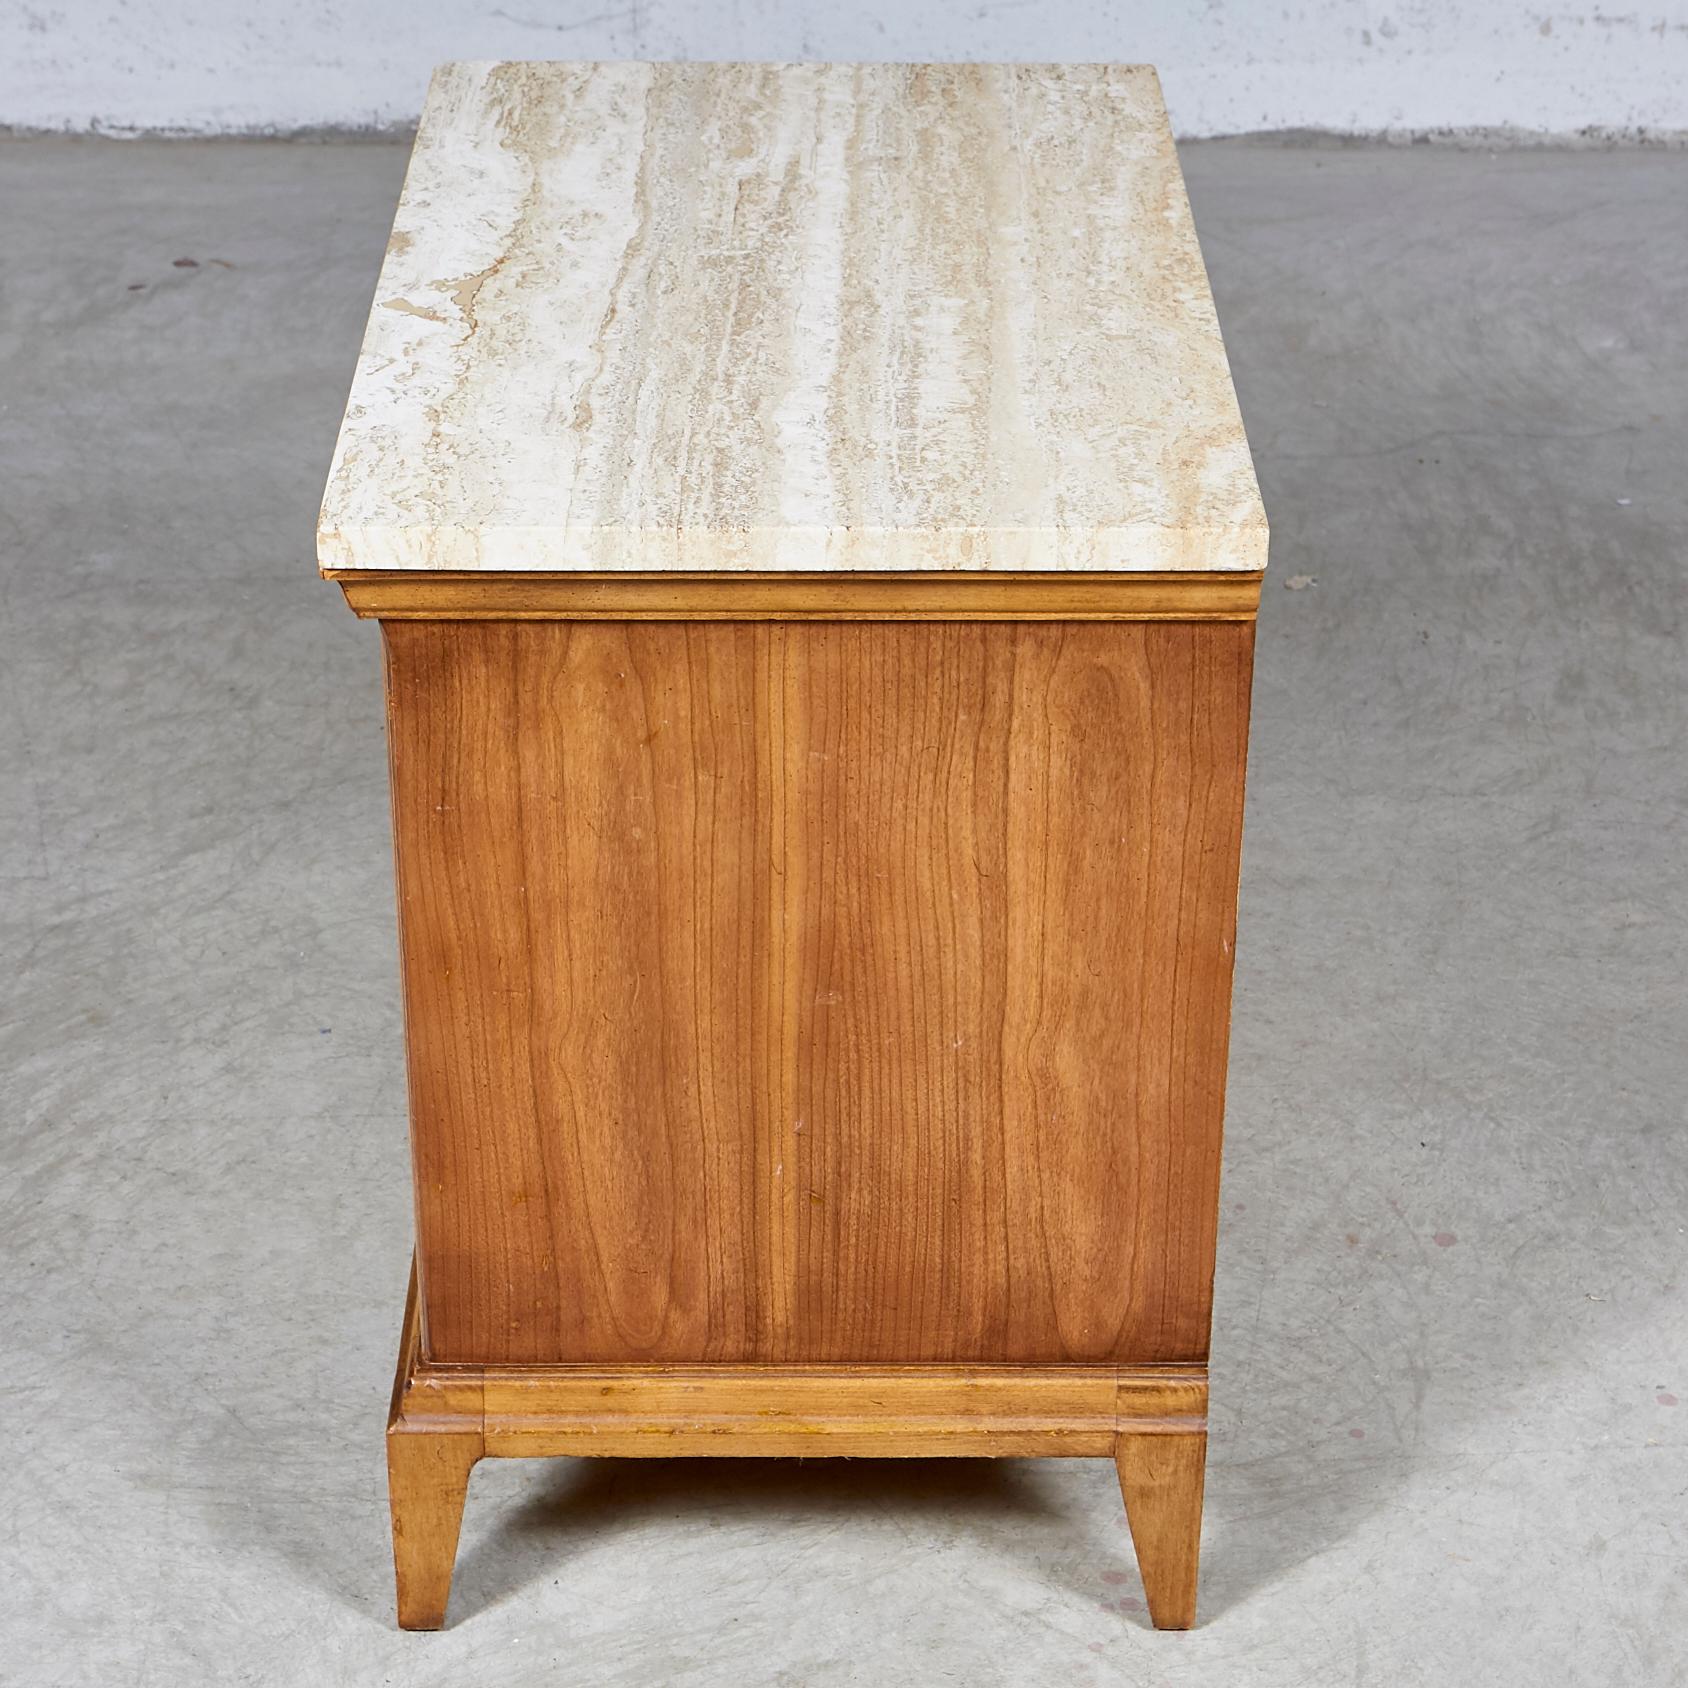 20th Century 1960s Fruitwood Nightstand with Travertine Top